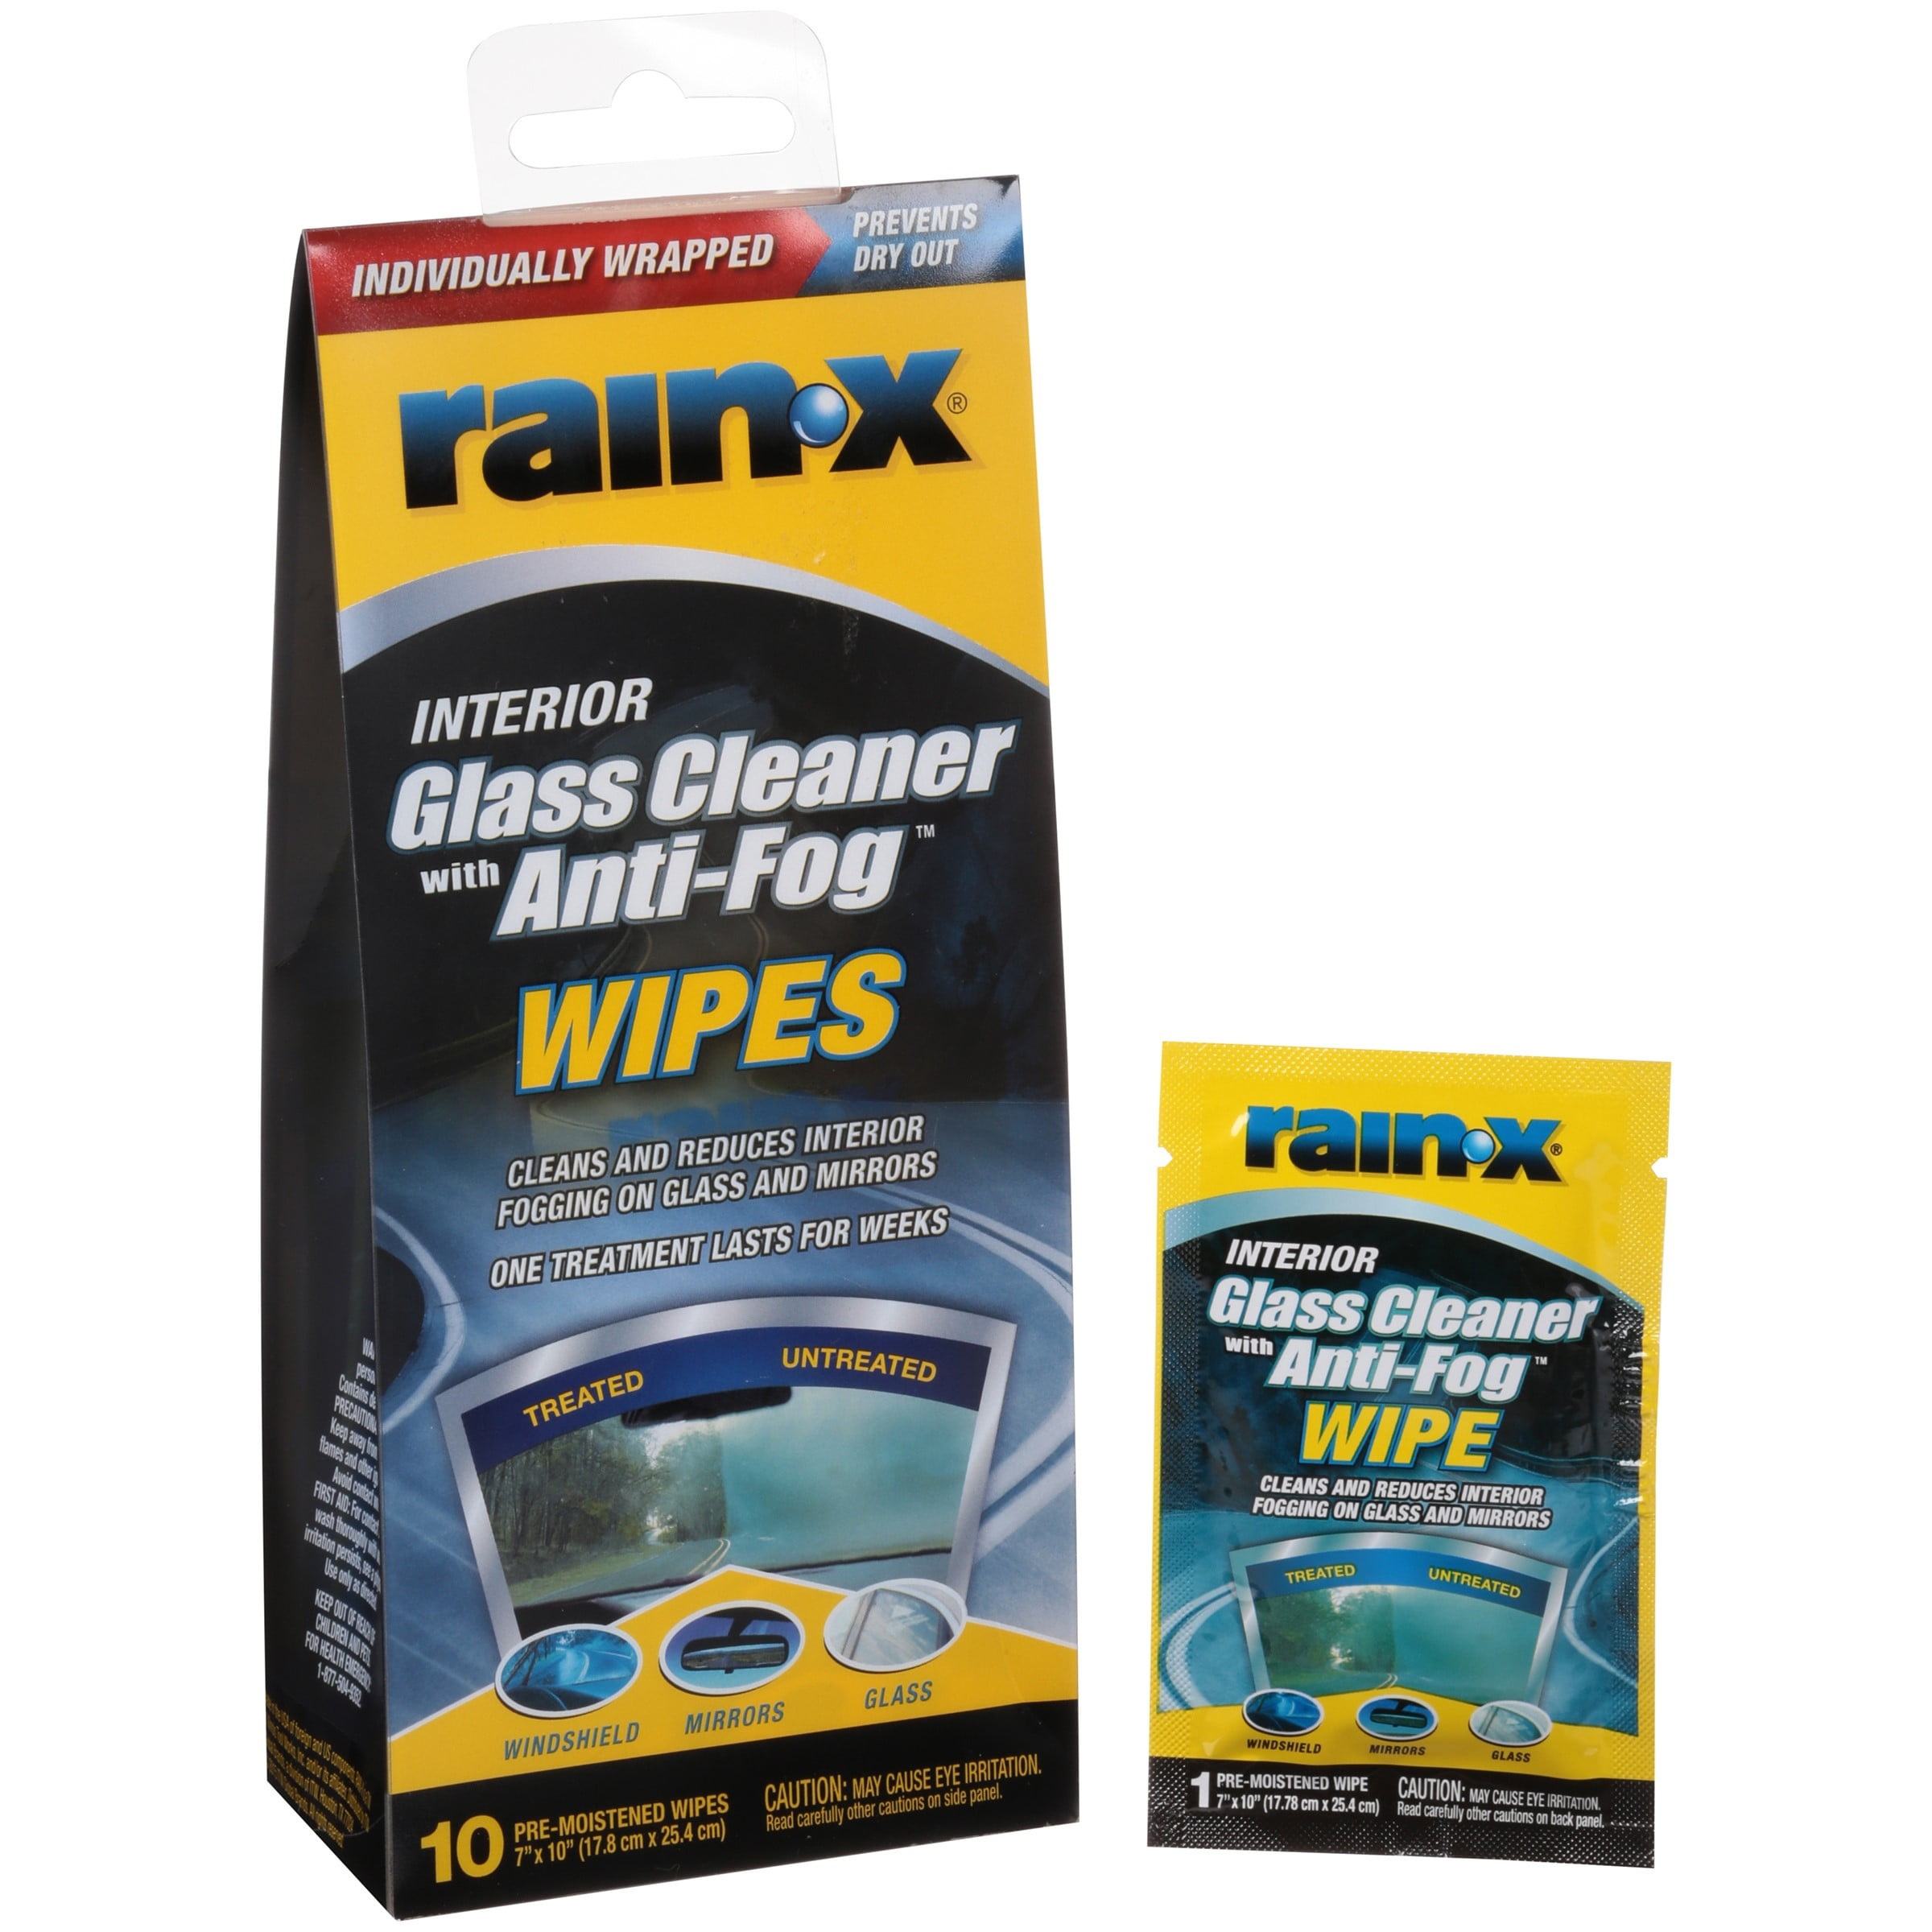 Rain-X Interior Glass Cleaner with Anti-Fog Wipes, 10ct - 630040